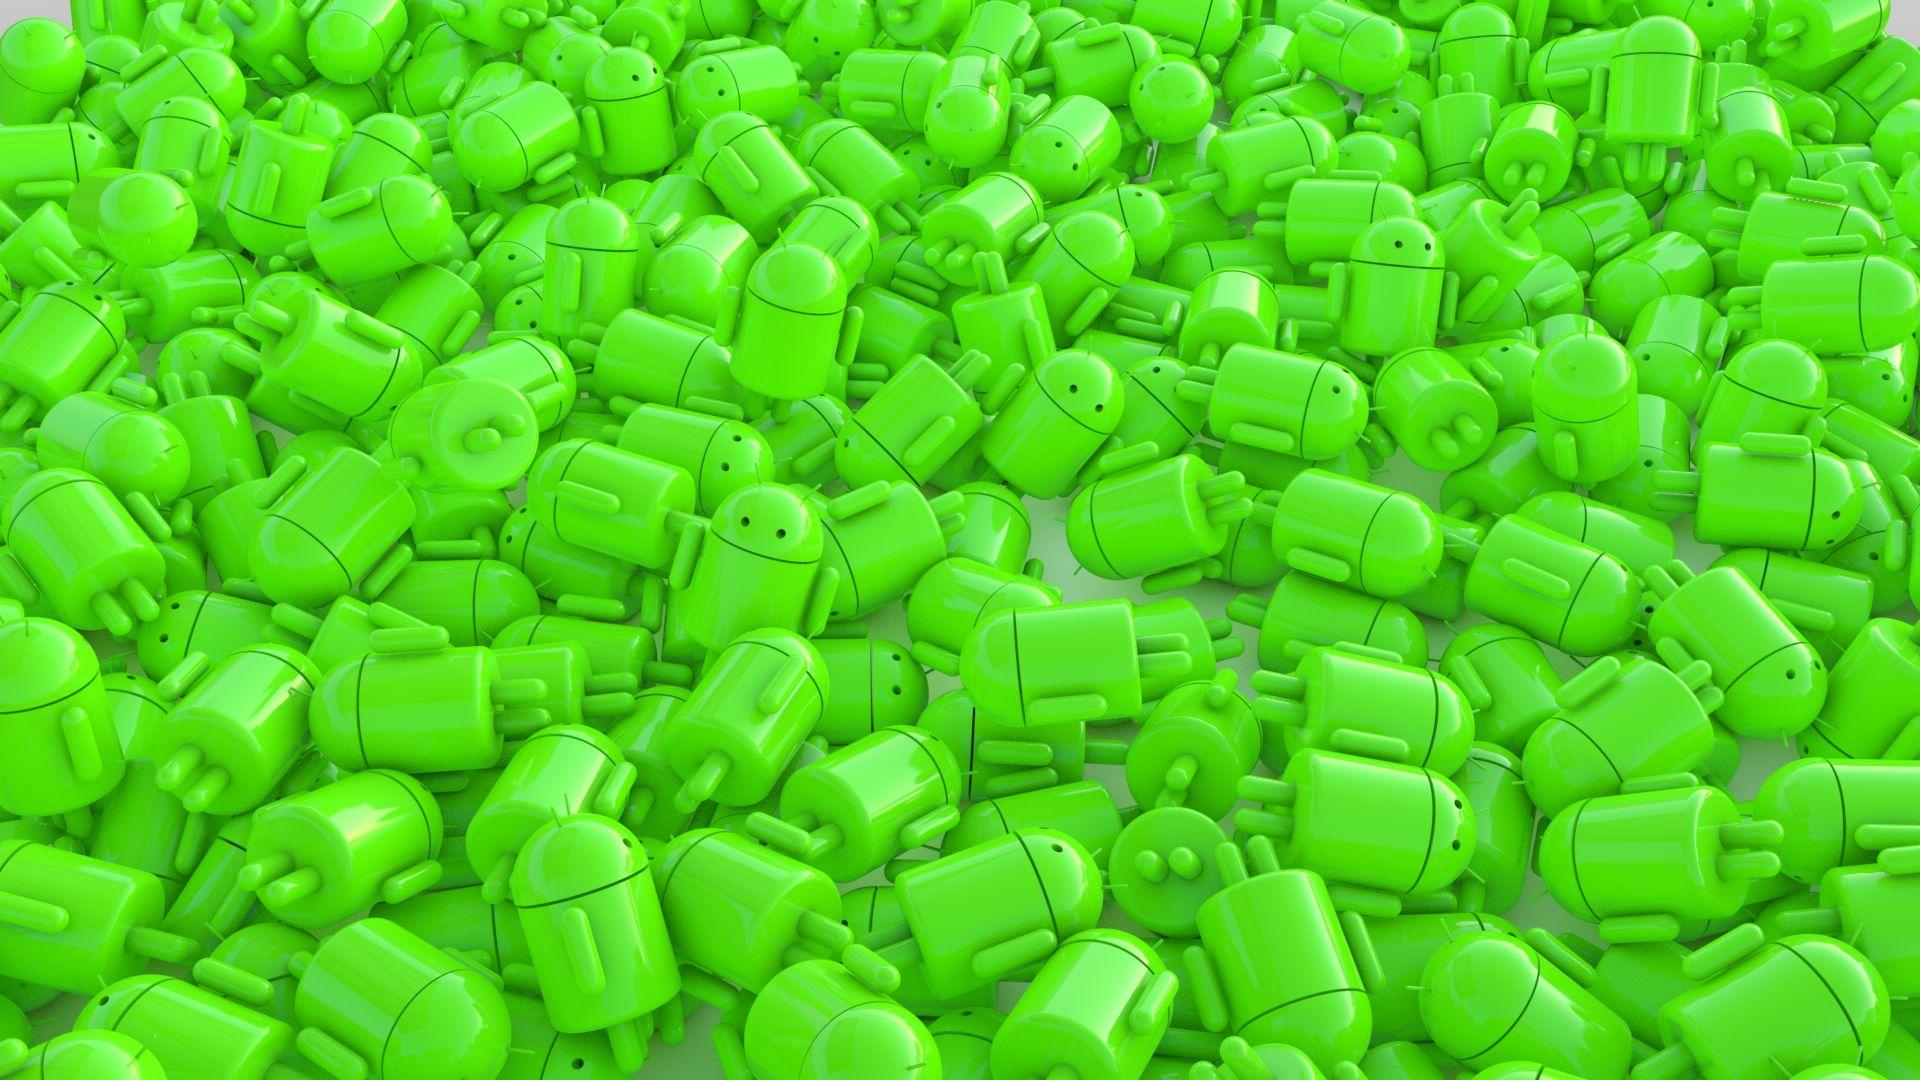 Miniature Android HD Wallpaper